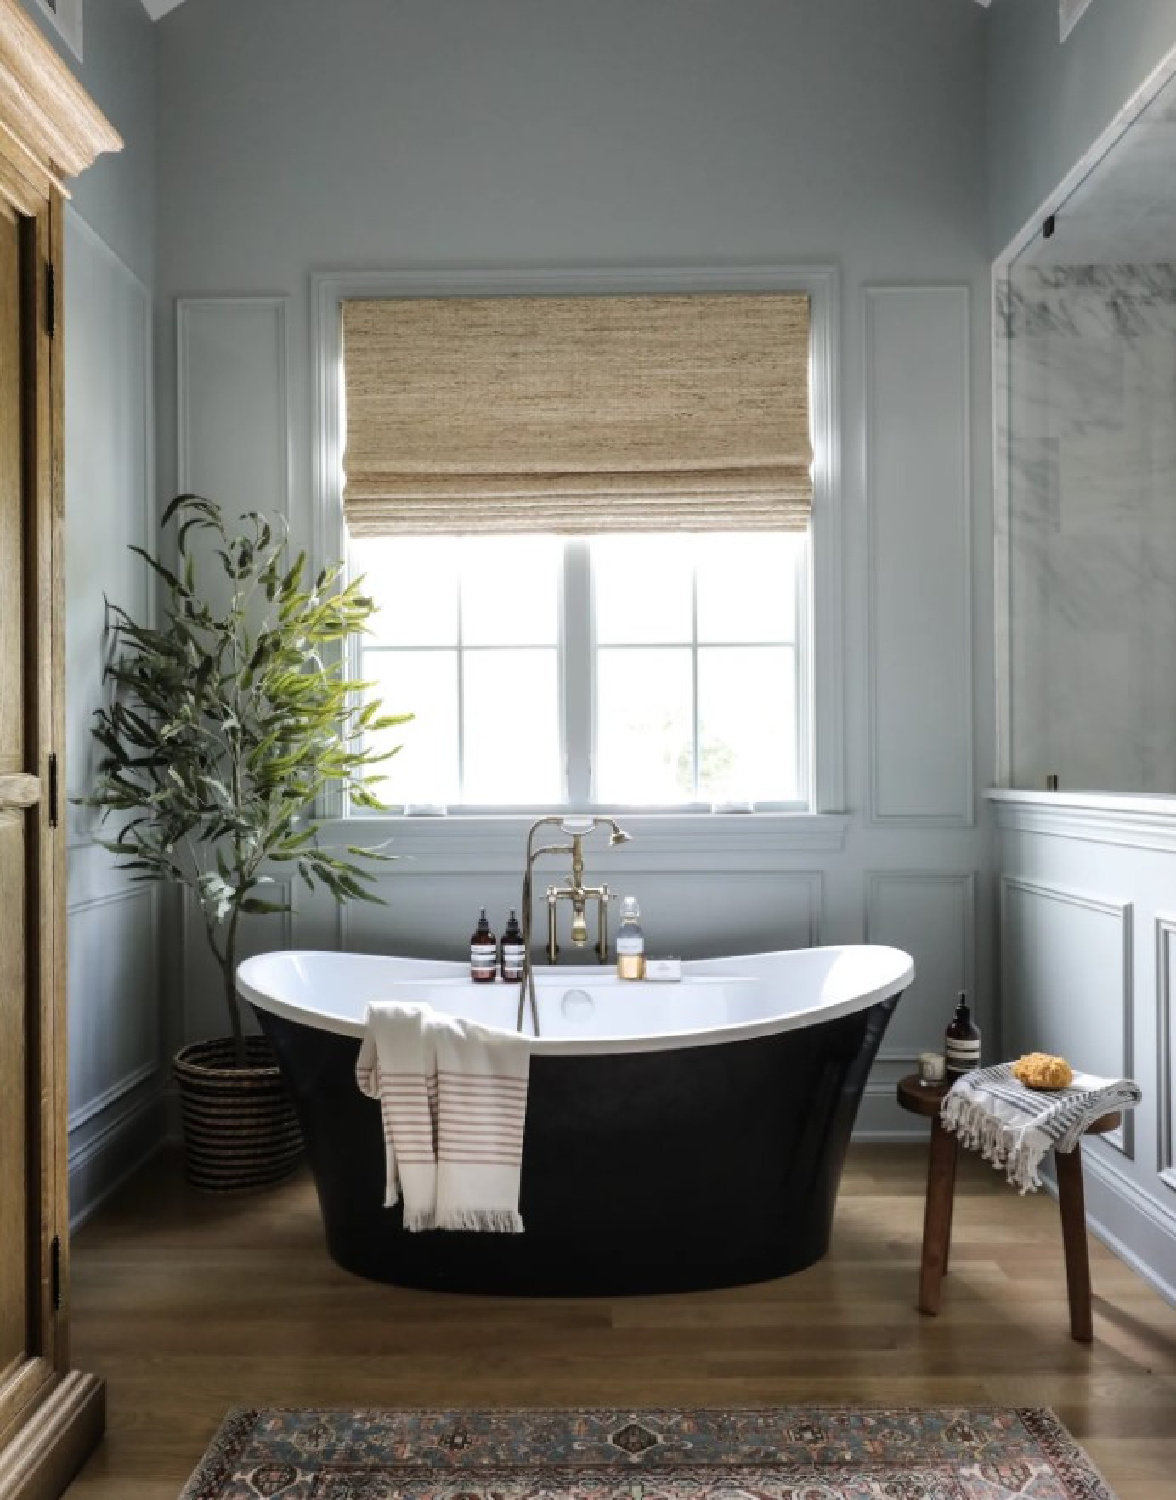 Beautiful classic bath with grey walls, oval soaking tub, and wood floor - Park and Oak.